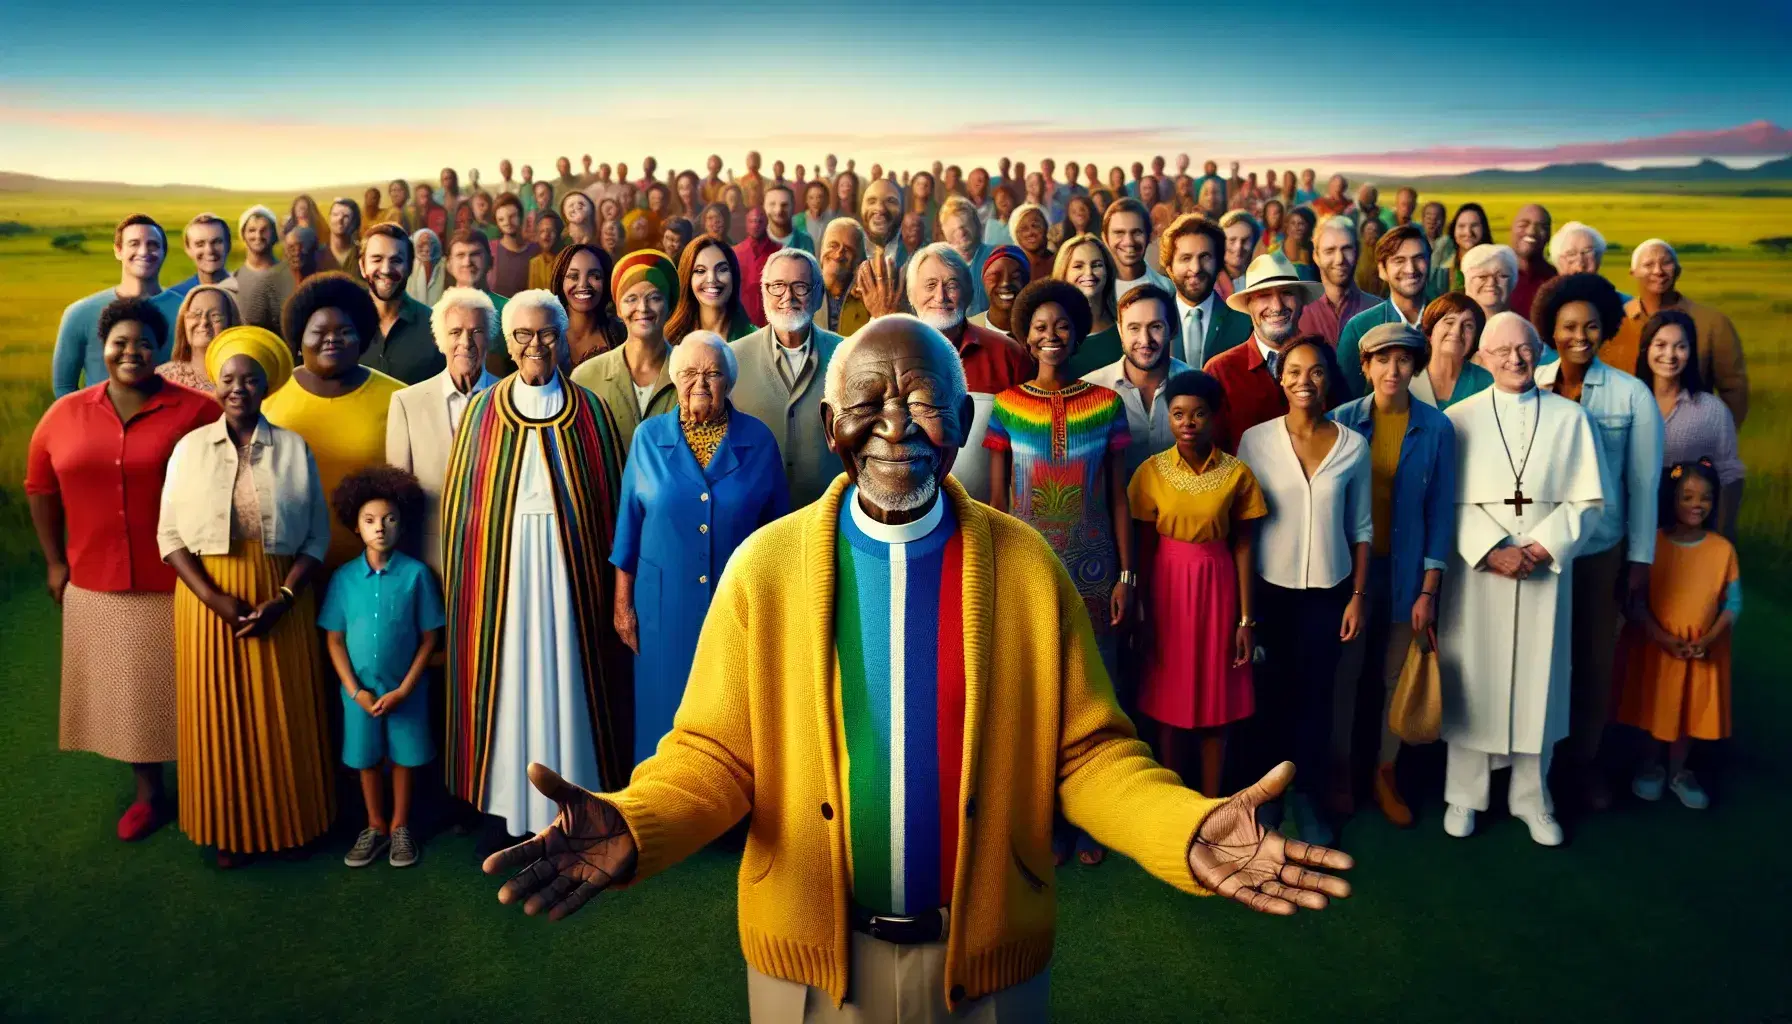 Diverse South African group in a unity circle, with a smiling elder in colorful attire, a cleric, and others in traditional and modern clothes against a scenic backdrop.